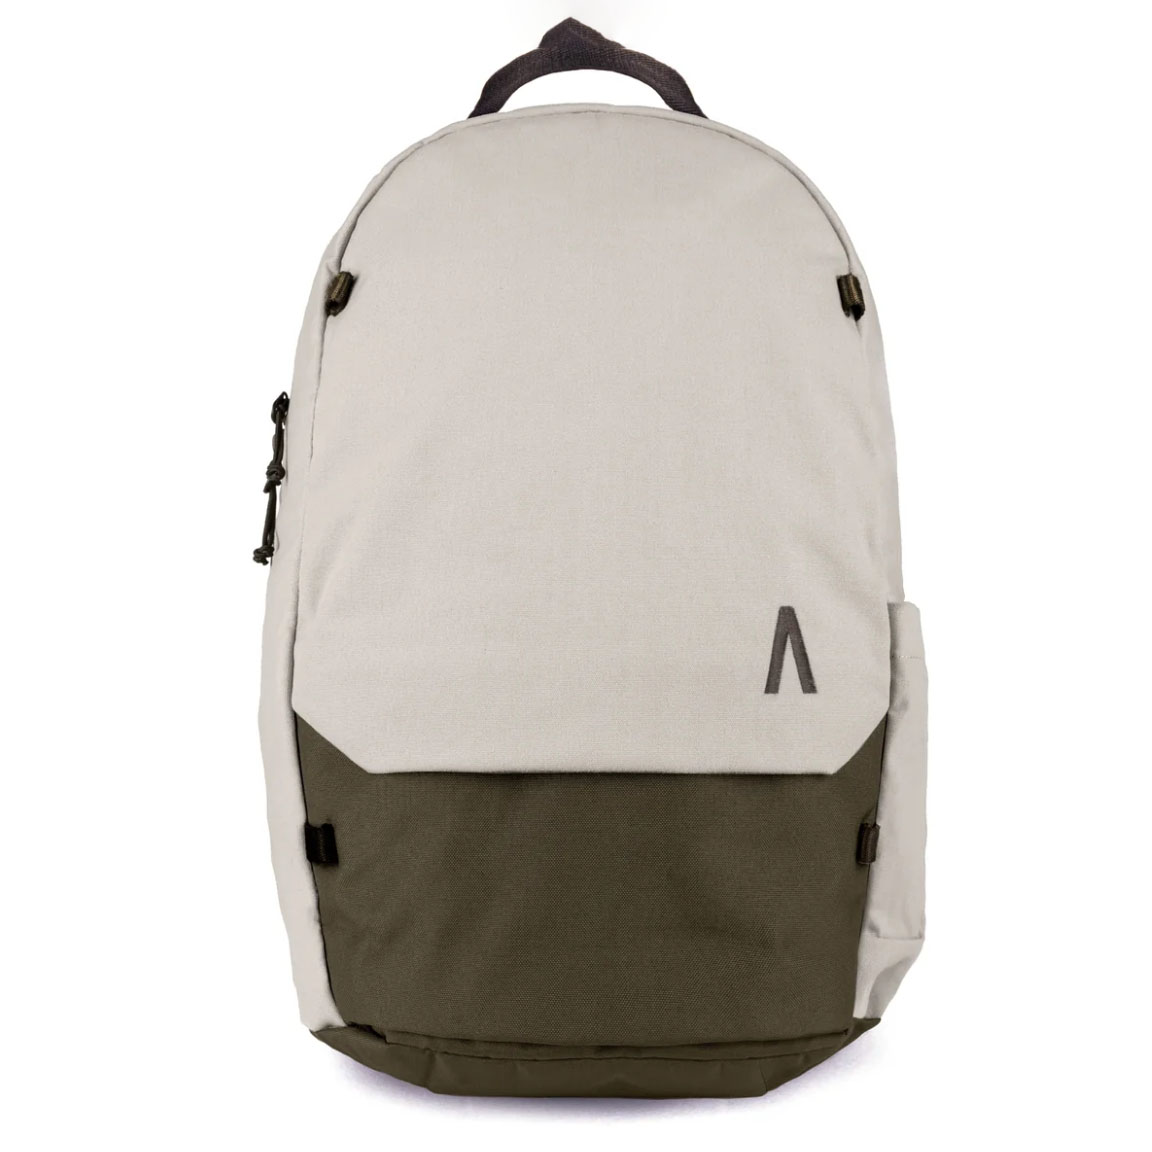 Boundary backpack in two-toned light brown